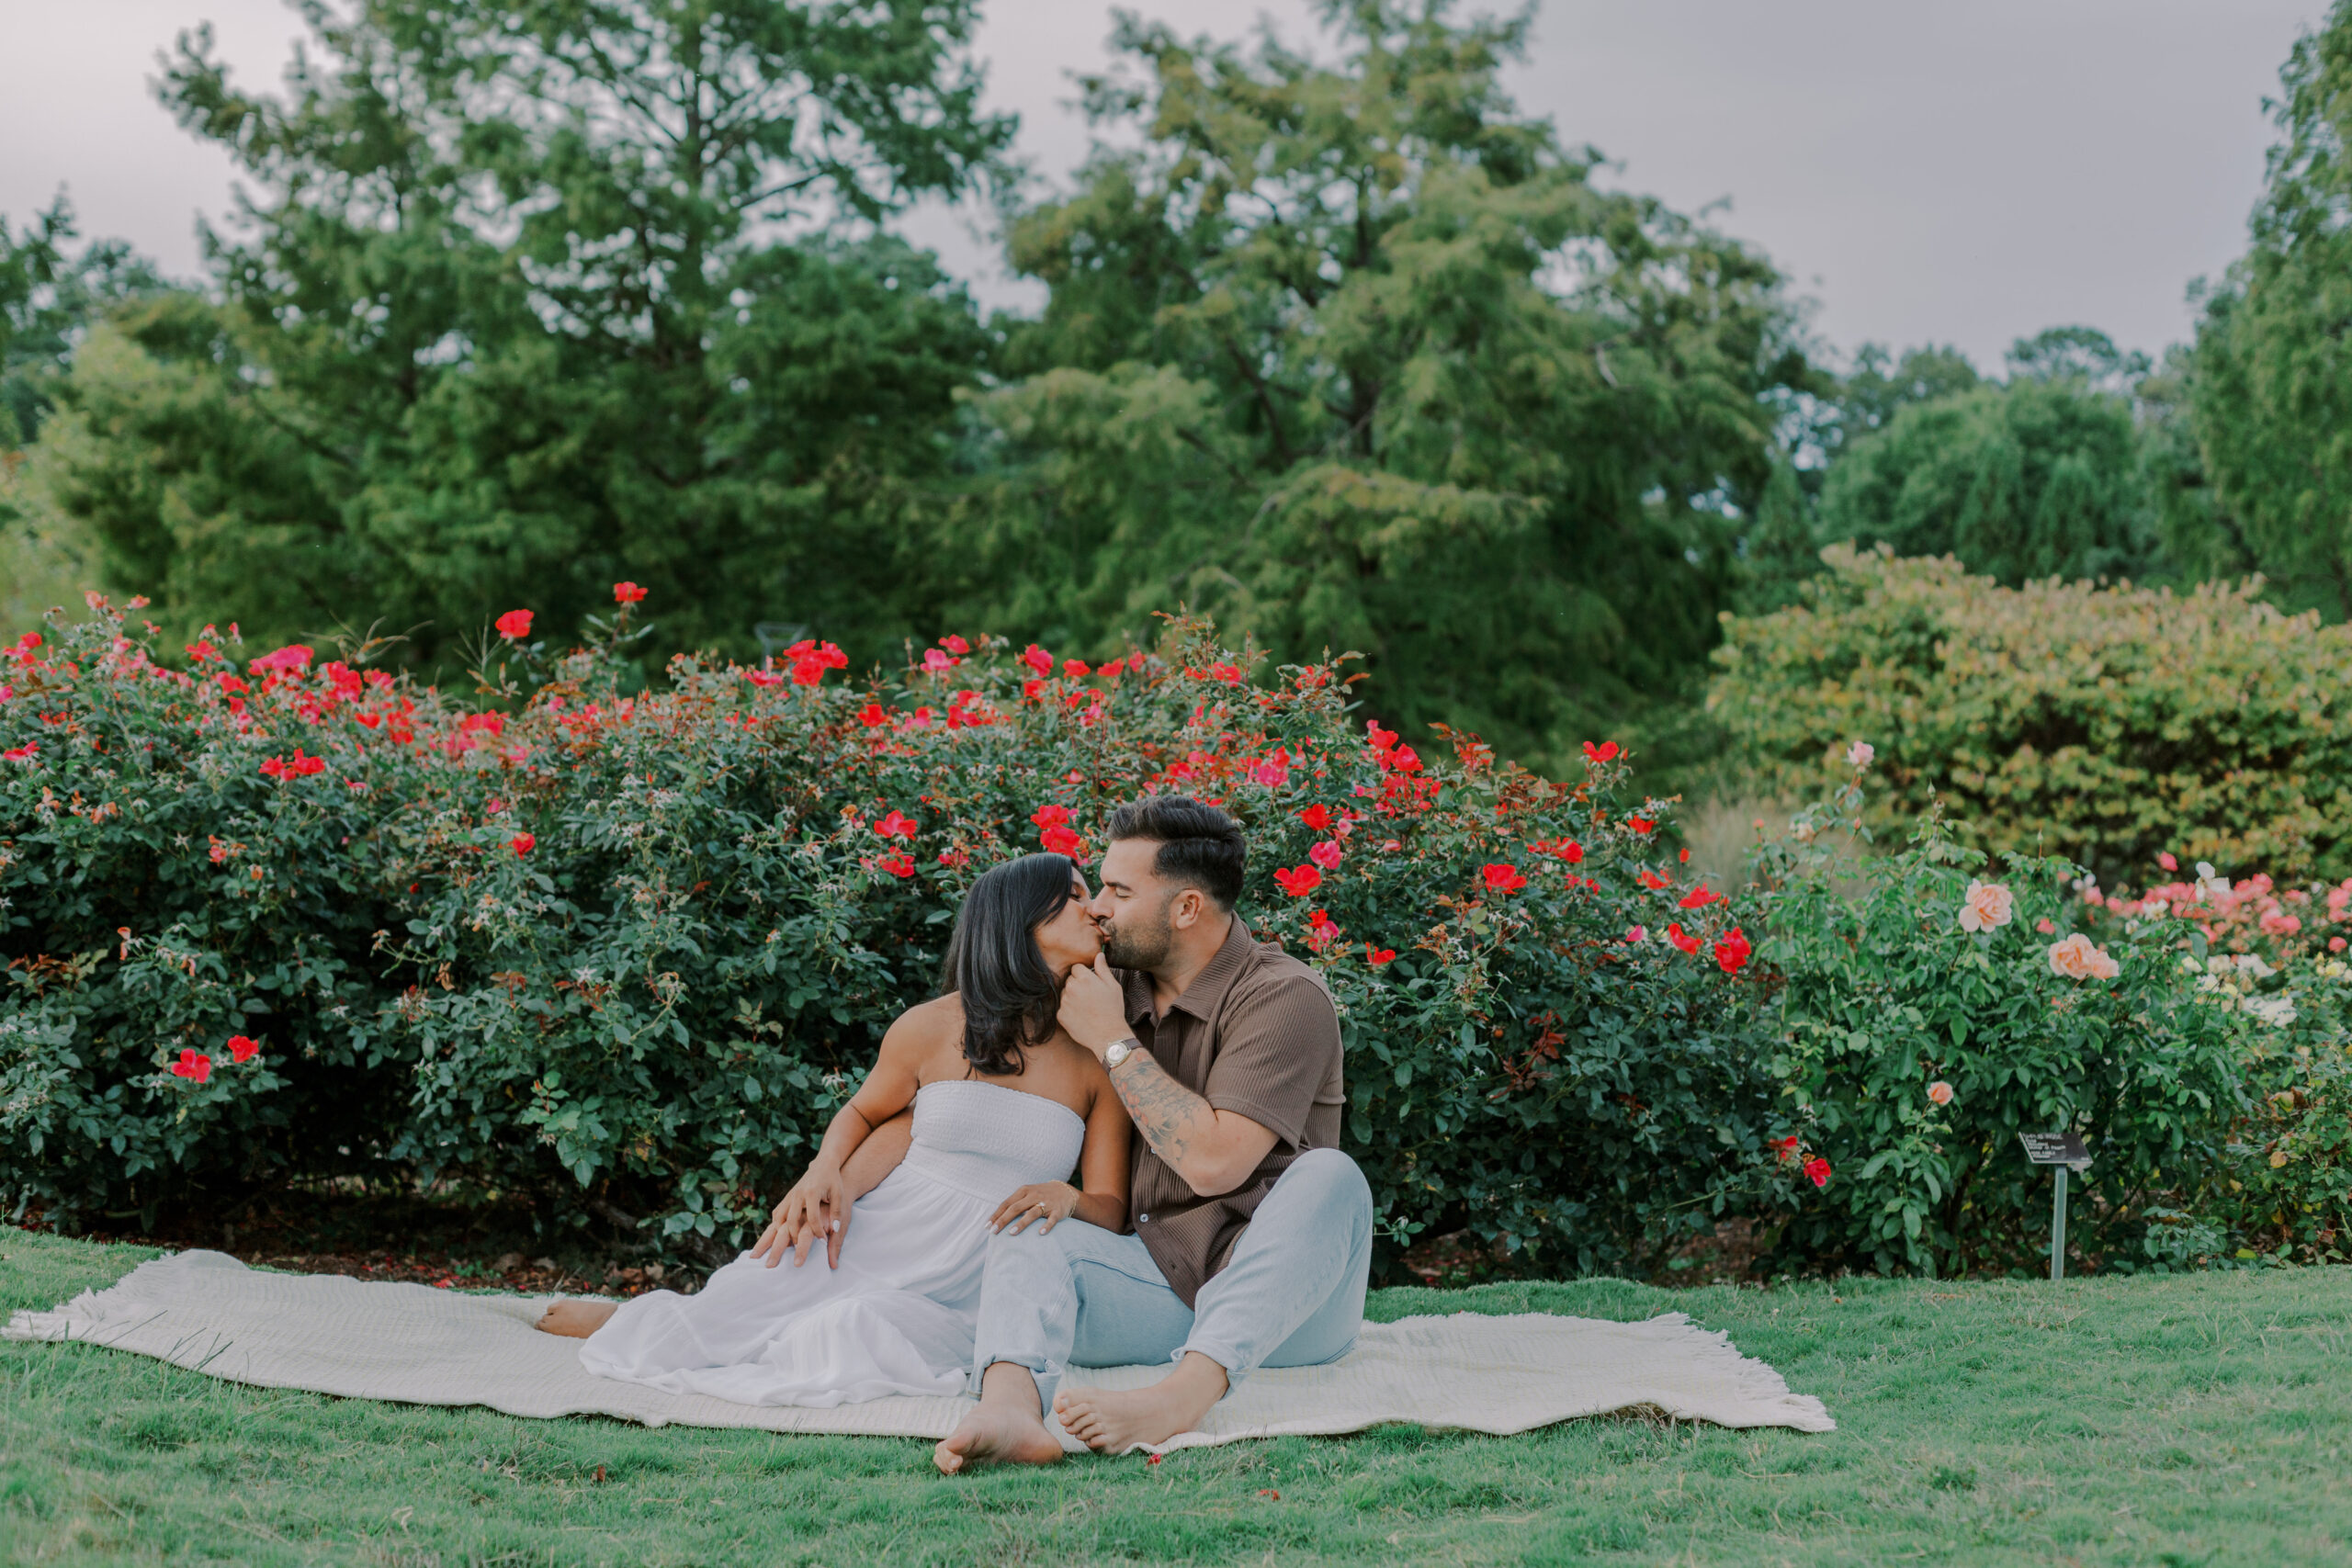 Engaged couple sitting on blanket in front of a large garden area with red flowers